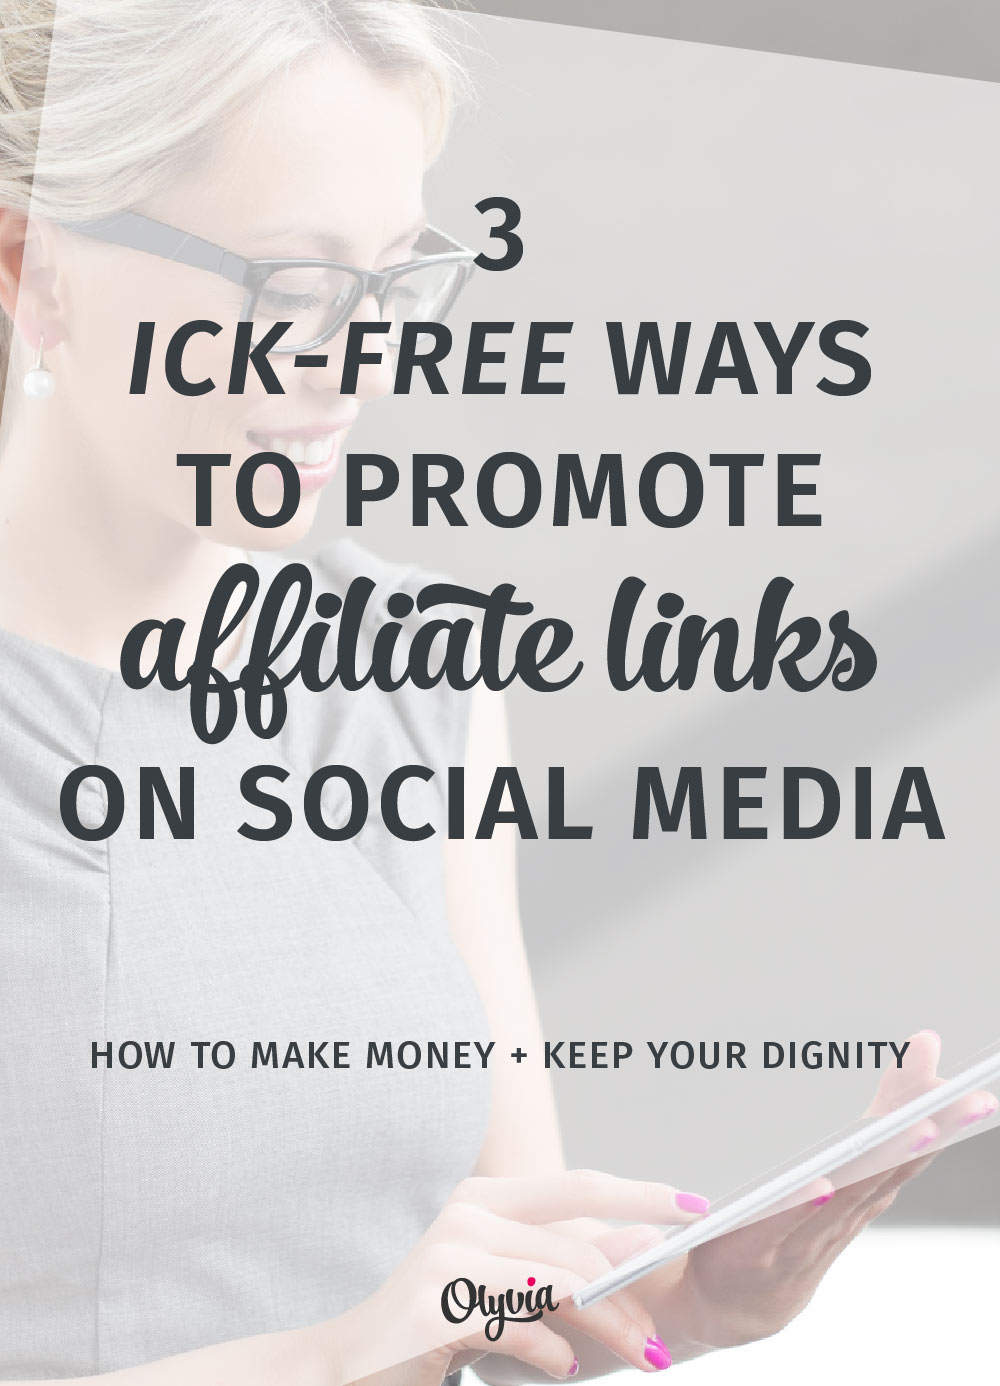 How to share + promote affiliate links on social media without sounding sleazy, icky, or greedy. | olyvia.co/promote-affiliate-links-on-social-media/